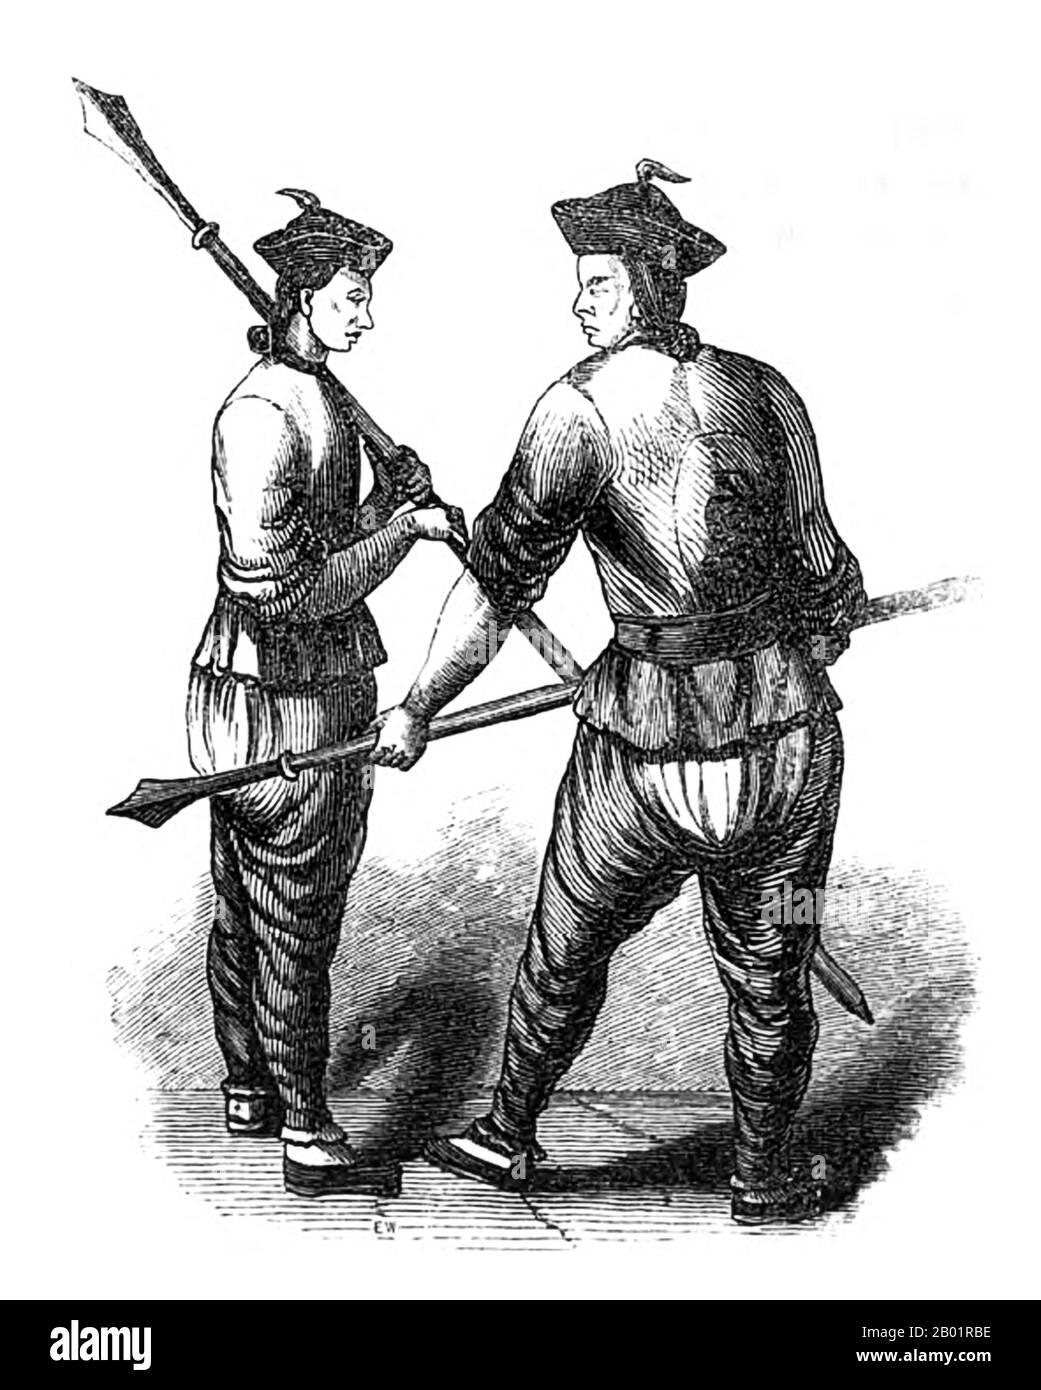 China/United Kingdom: 'Tartar Spearman'. Wood engraving by E. T. Wigan, 1844.  The First Anglo-Chinese War (1839-1842), known popularly as the First Opium War or simply the Opium War, was fought between the United Kingdom and the Qing Dynasty of China over their conflicting viewpoints on diplomatic relations, trade, and the administration of justice.  Chinese officials wished to stop what was perceived as an outflow of silver and to control the spread of opium, and confiscated supplies of opium from British traders. Stock Photo